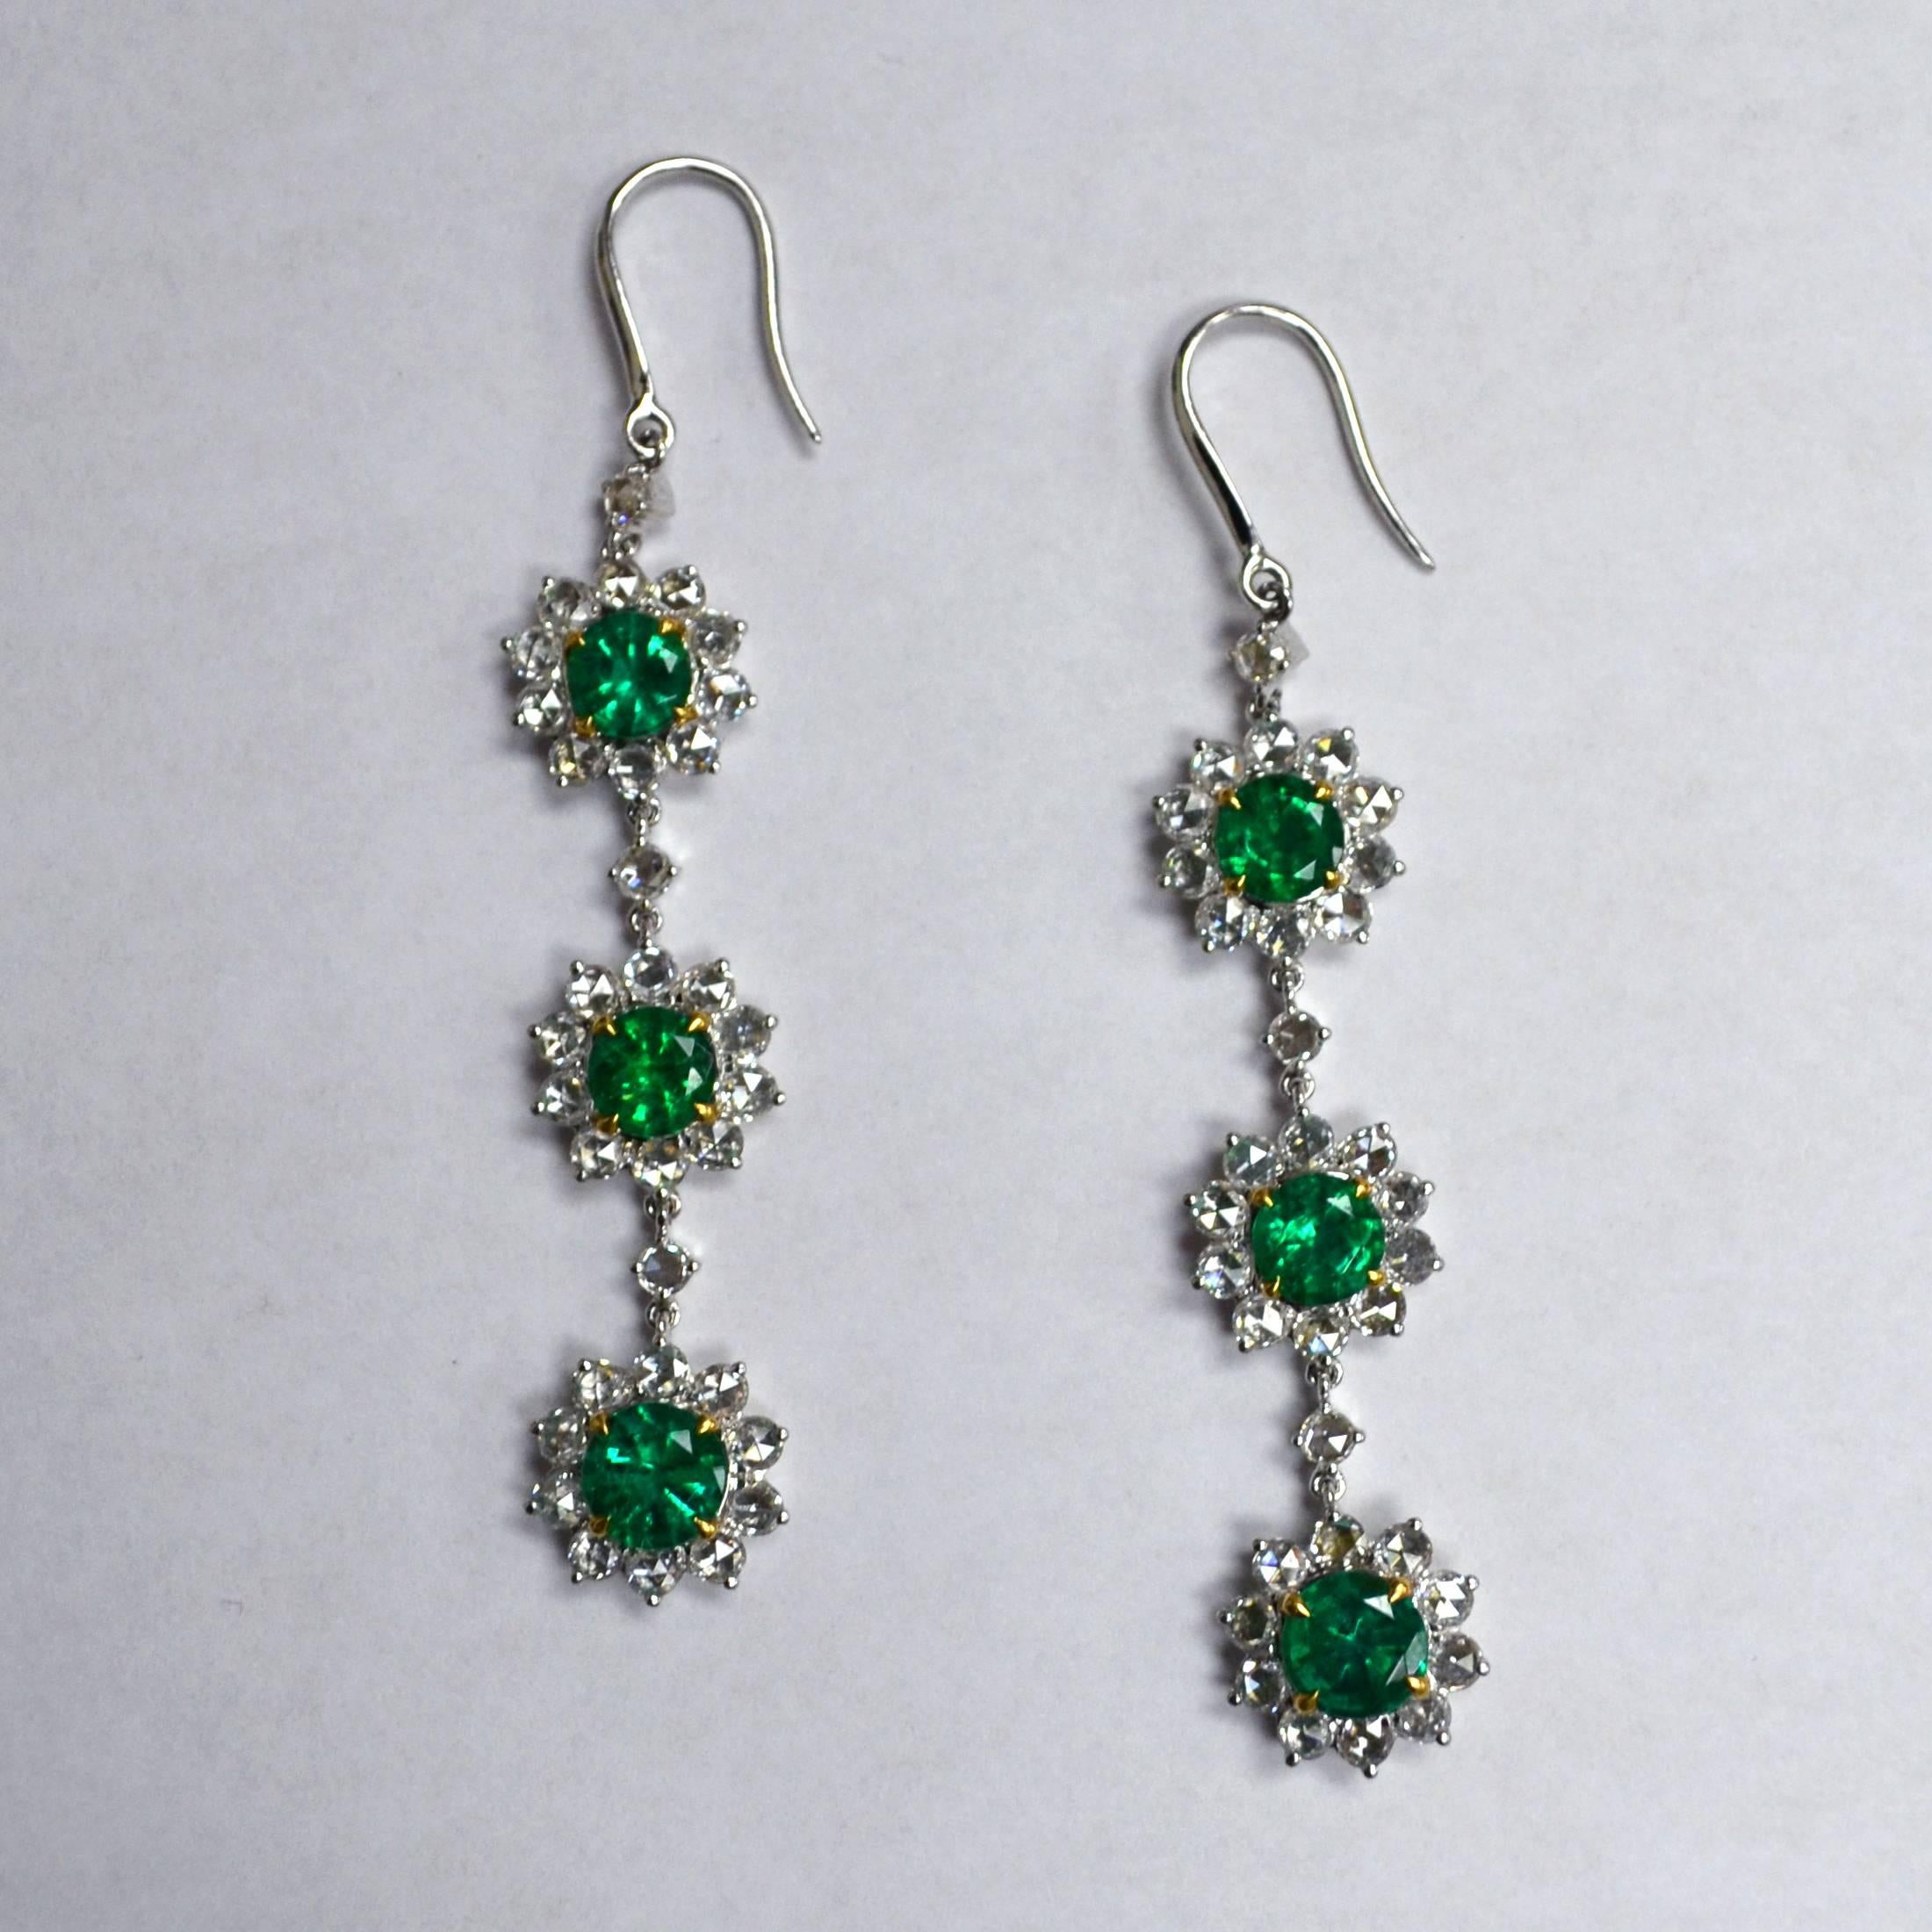 French Hook Earrings in 18K two-tone gold set with 6 round brilliant-cut Zambian Emeralds (4.01 carat) and 66 round brilliant-cut Diamonds (3.08 carat) 
